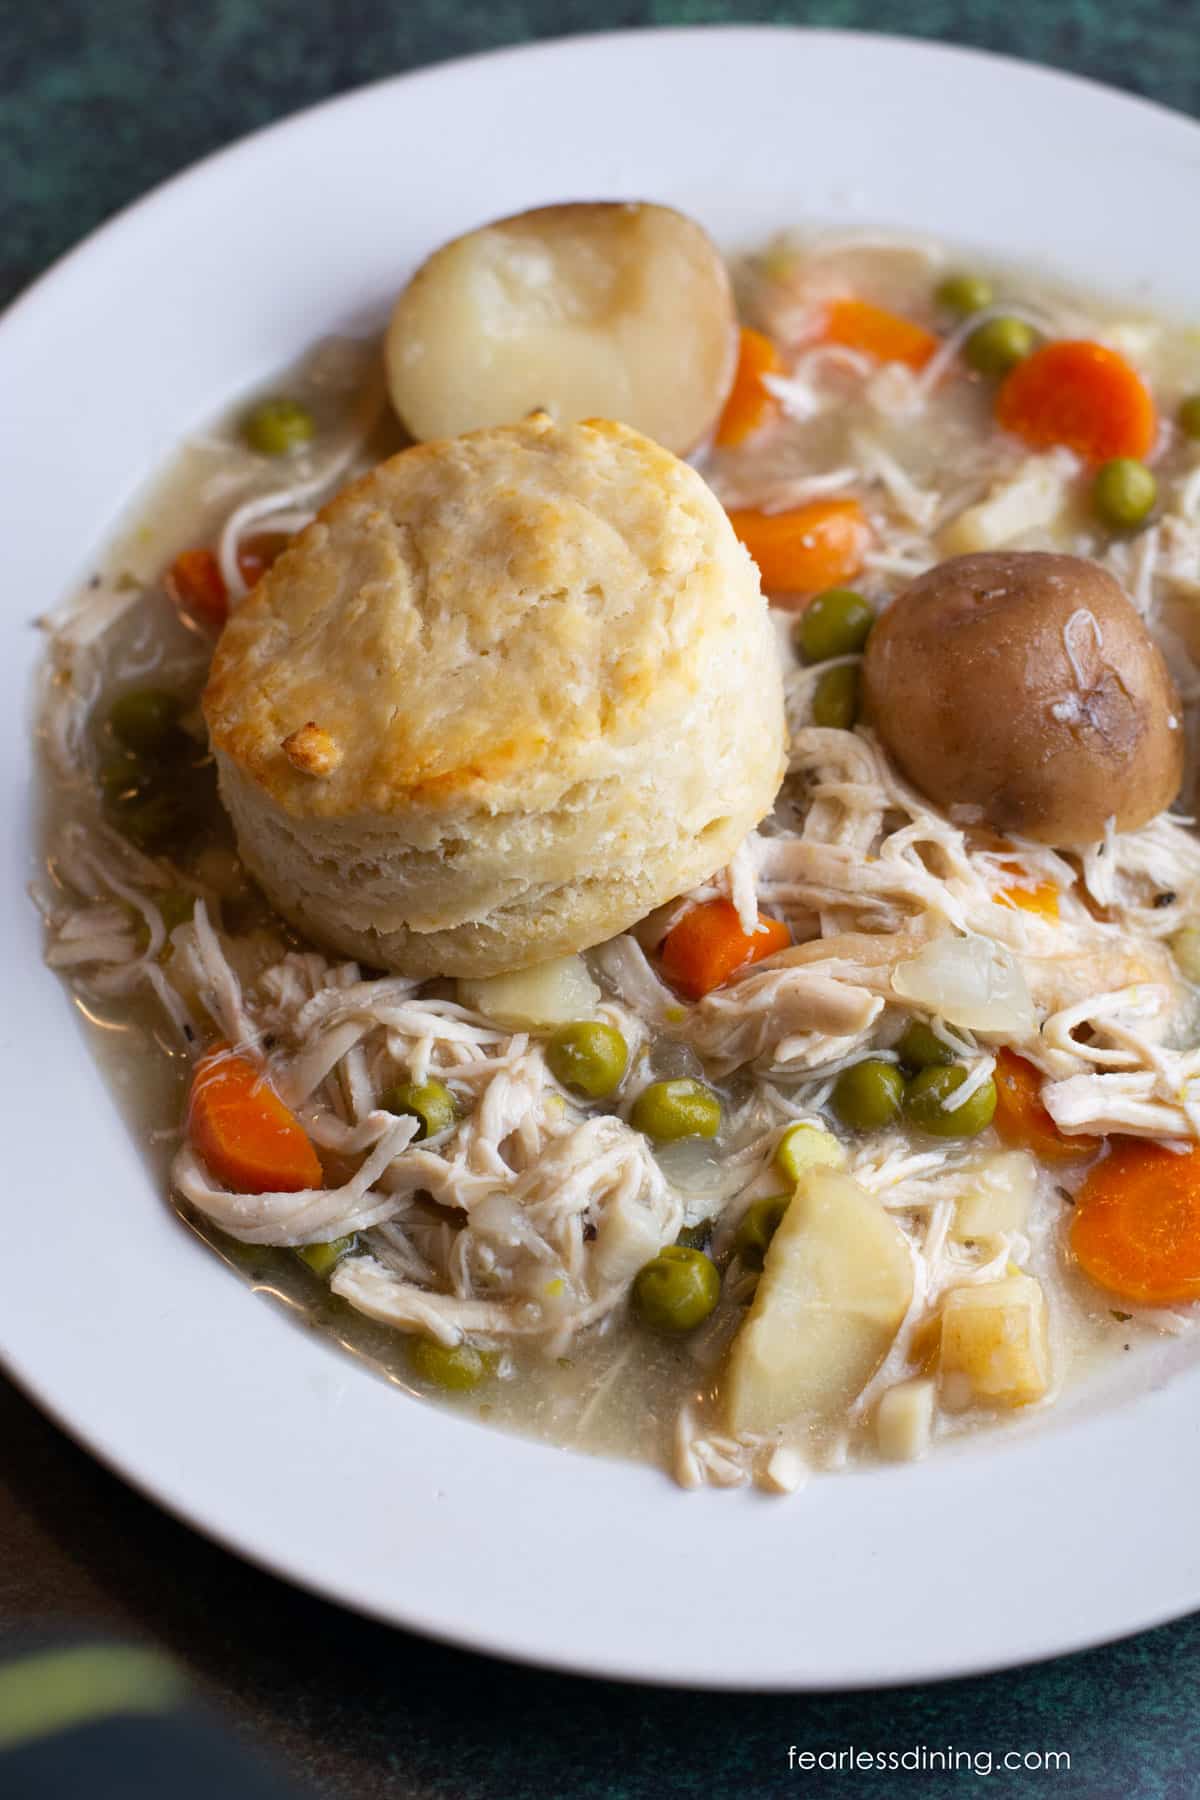 A plate of slow cooker chicken pot pie topped with a biscuit.